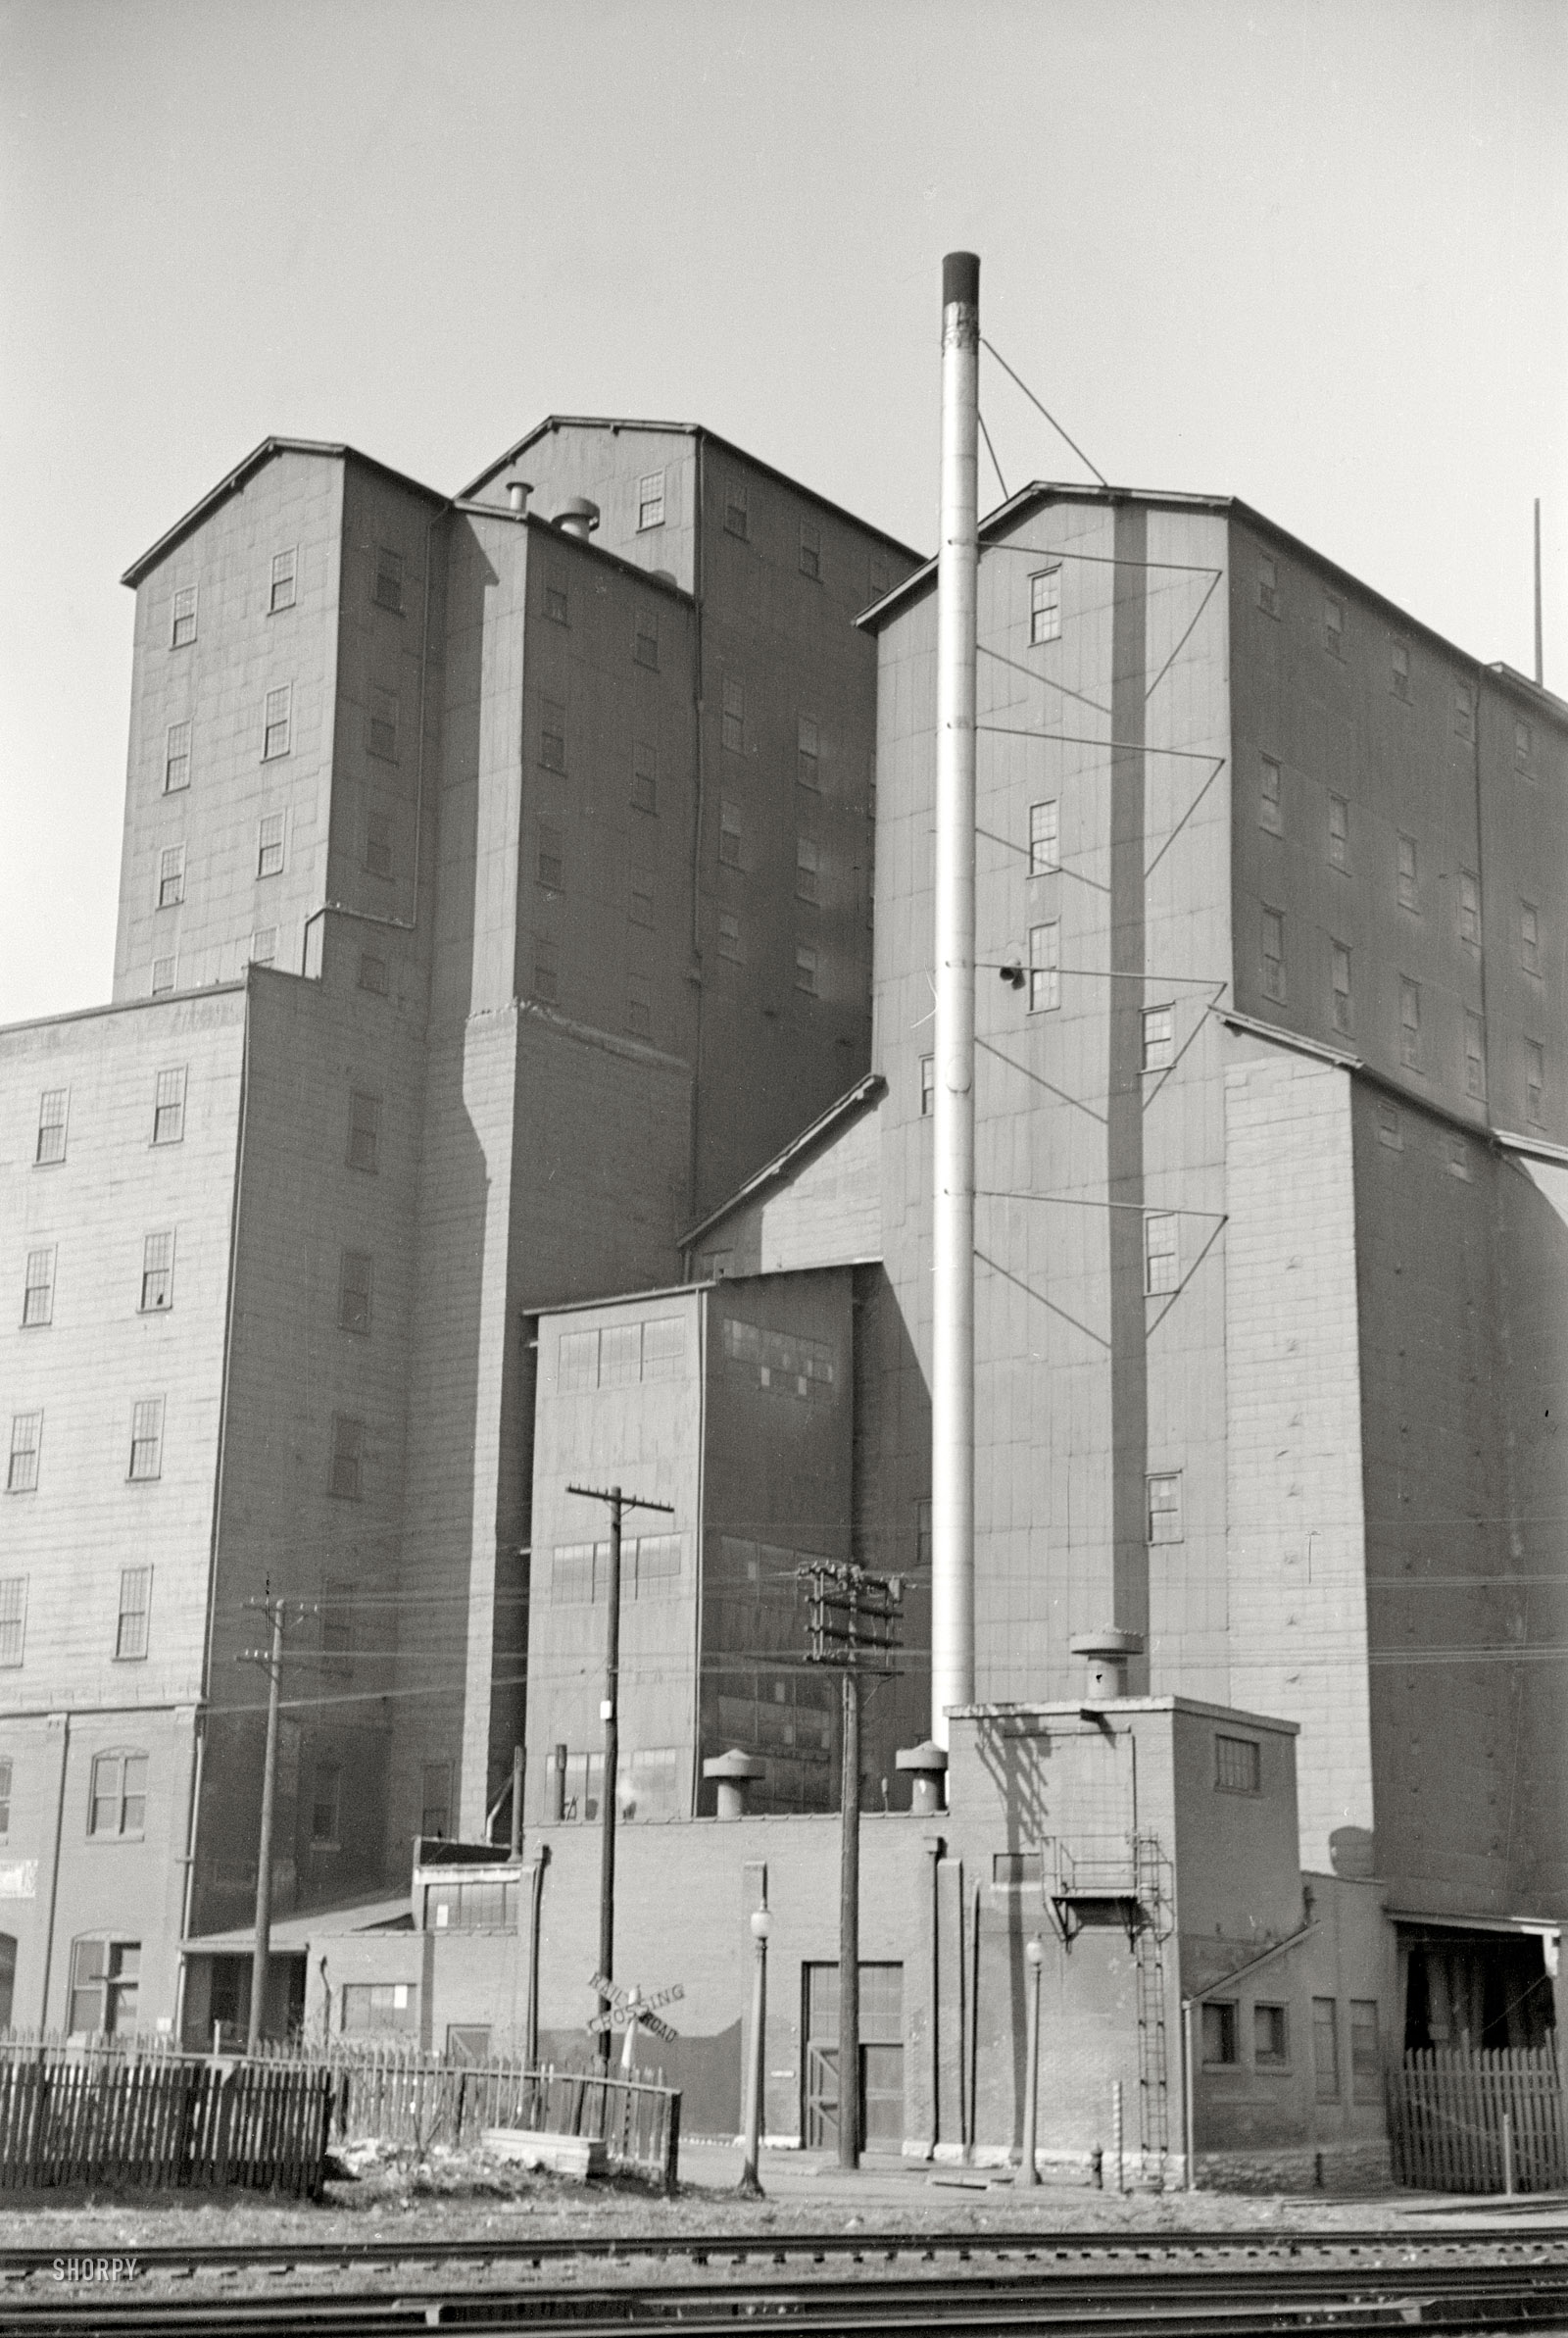 January 1939. St. Louis, Missouri. "Grain elevator on riverfront." 35mm negative by Arthur Rothstein for the Farm Security Administration. View full size.